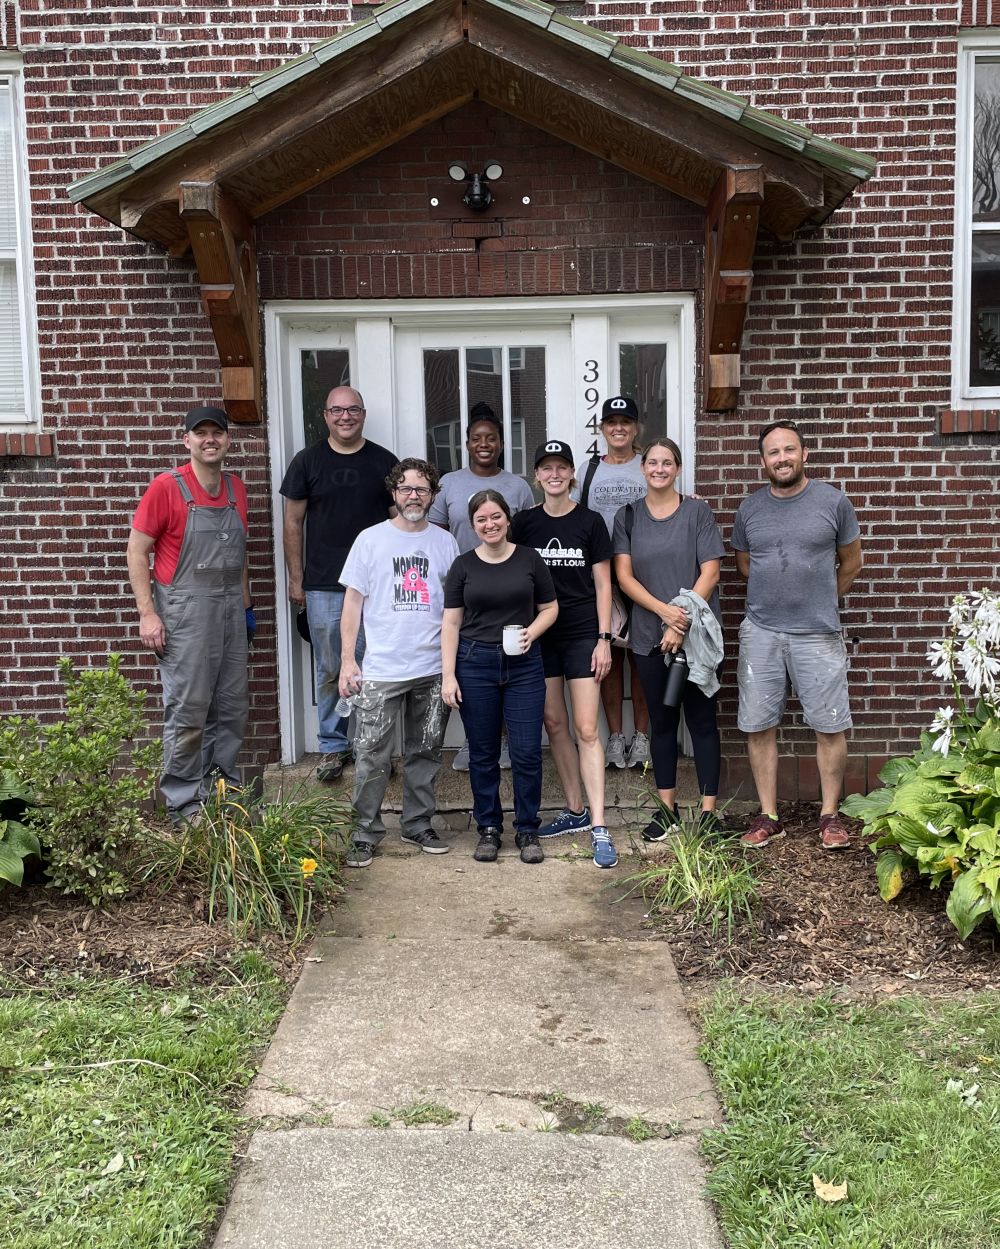 Our St. Louis team donated a total of 252 hours of work.